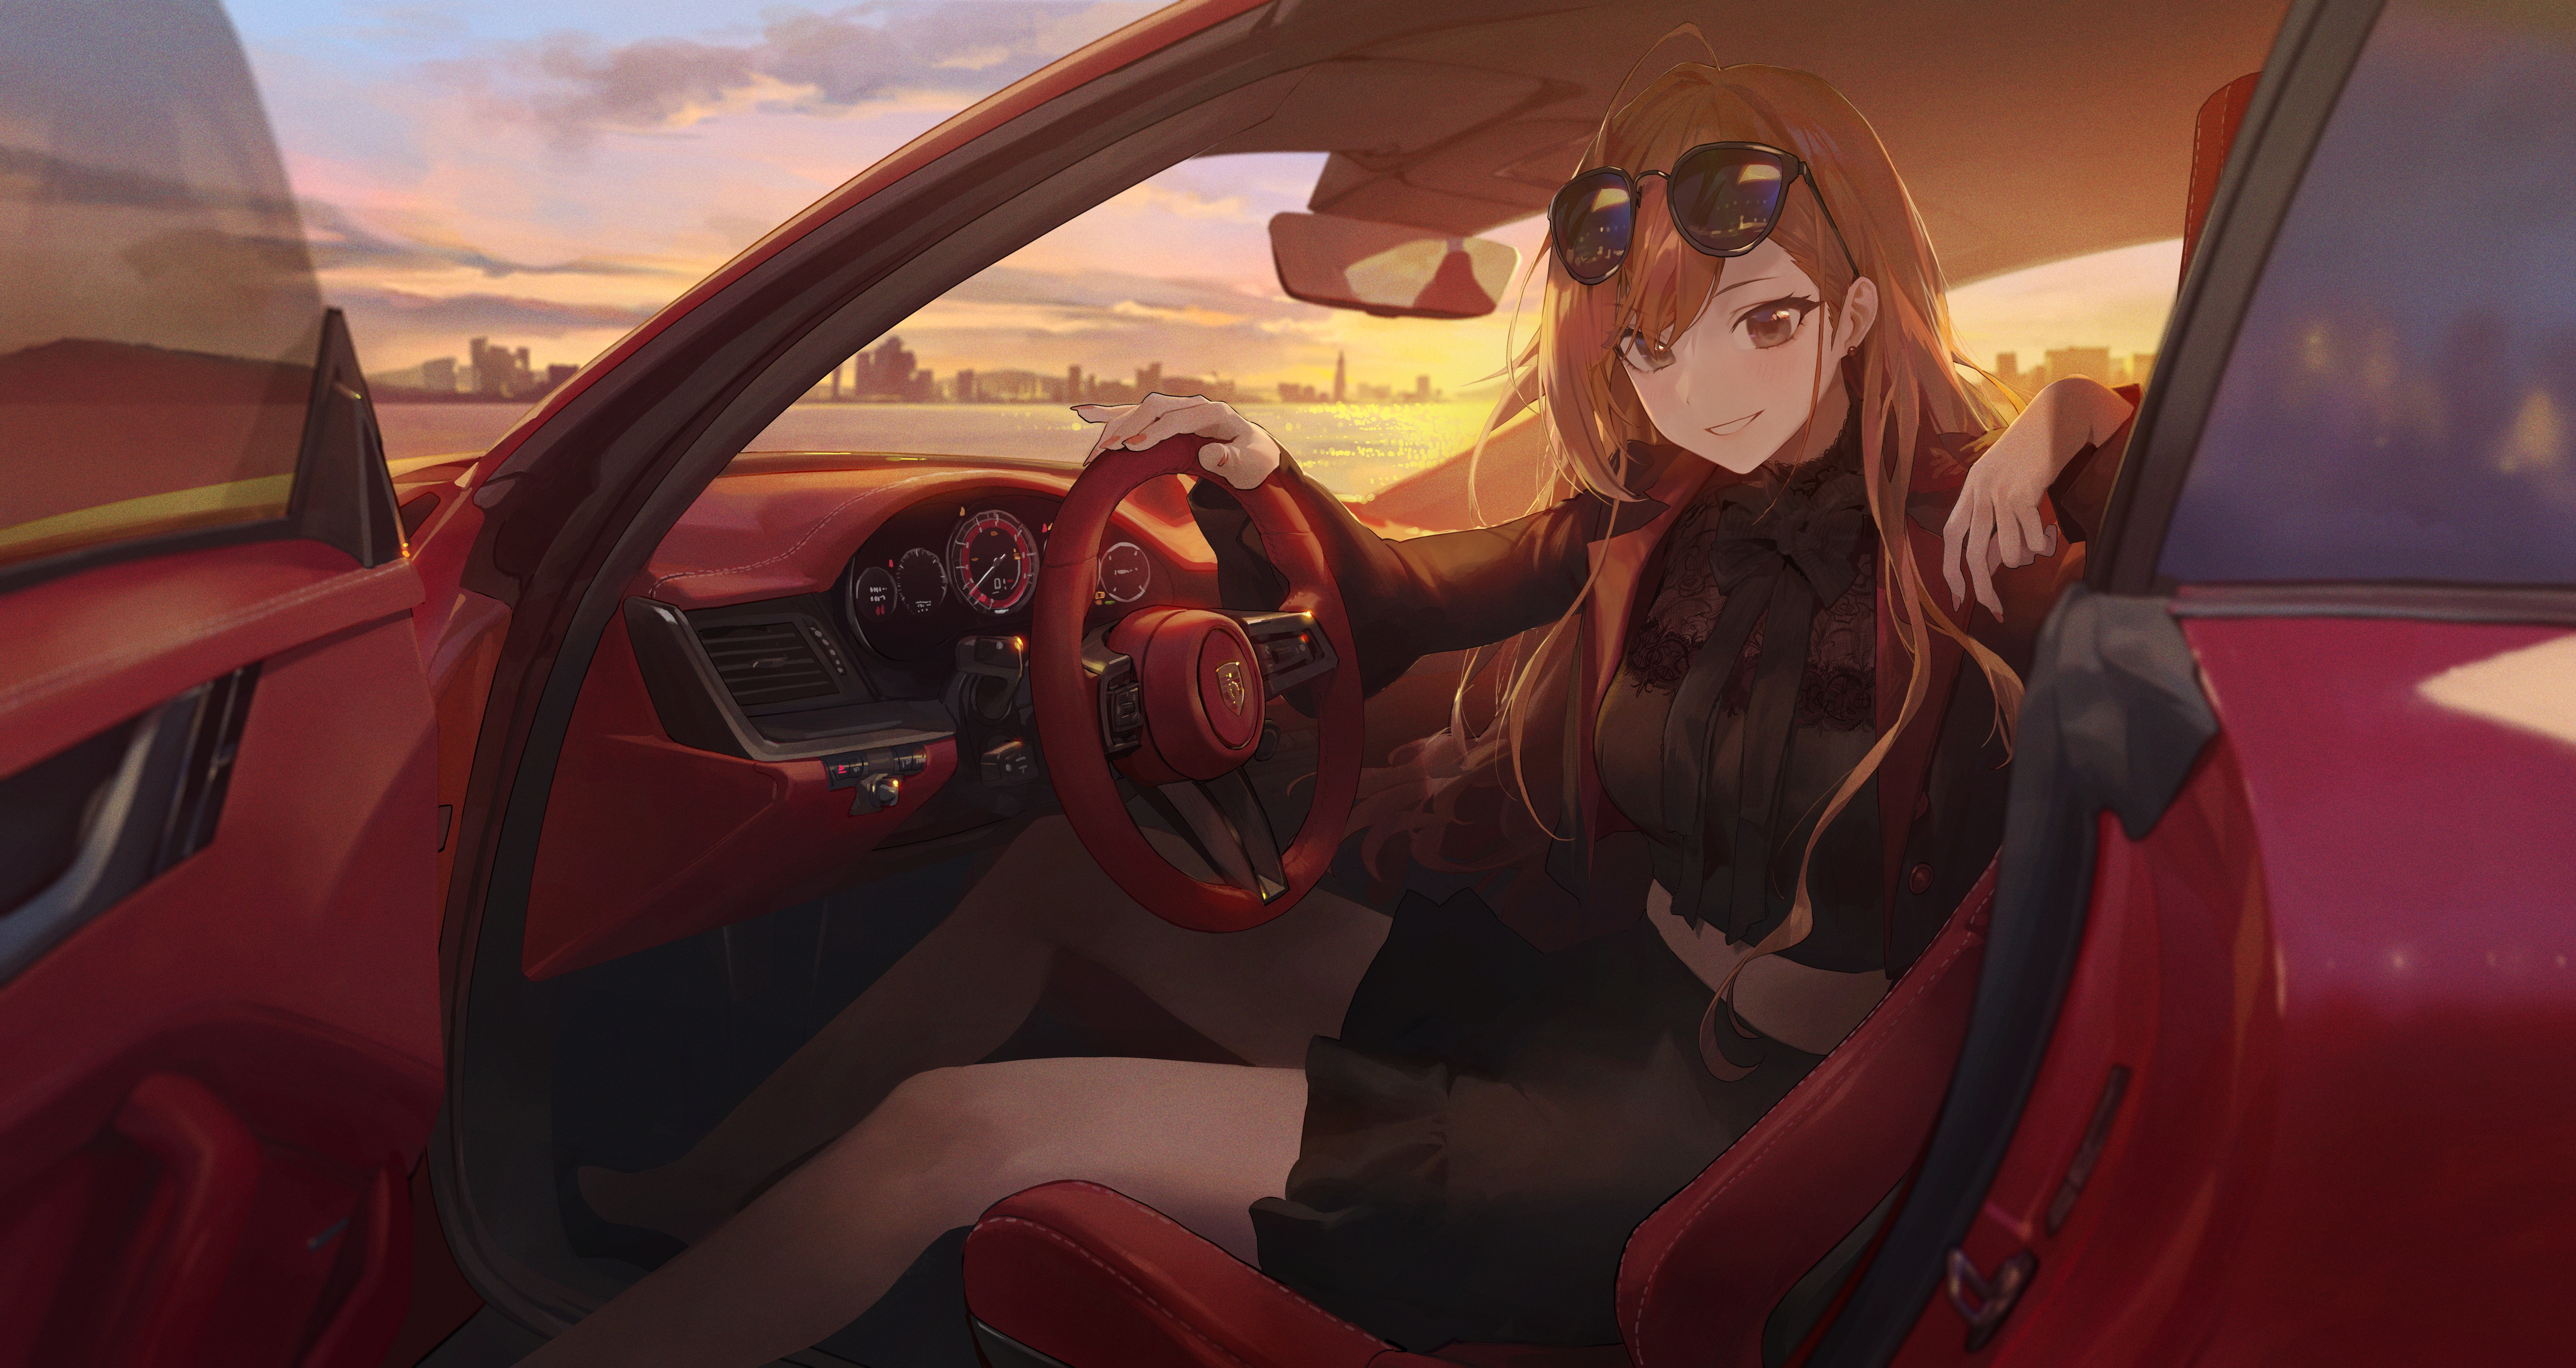 Anime Anime Girls Artwork Vehicle Mossi Artist Car THE IDOLM STER Car Interior Smiling Brunette Brow 6000x3186